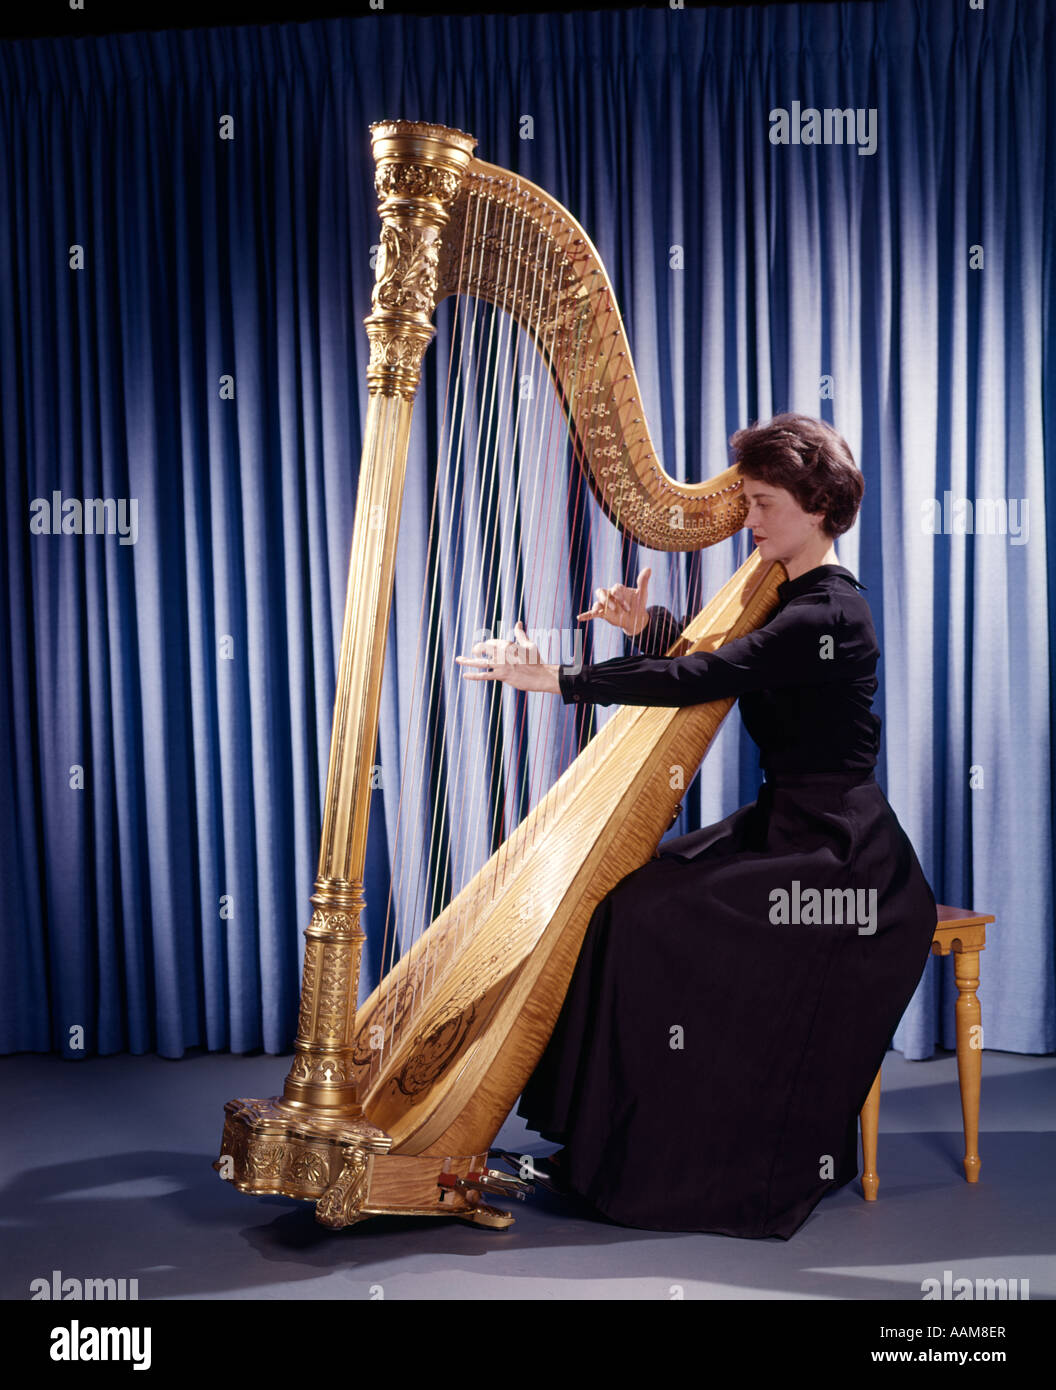 https://c8.alamy.com/comp/AAM8ER/1950s-1960s-1970s-retro-woman-musician-playing-large-classical-harp-AAM8ER.jpg